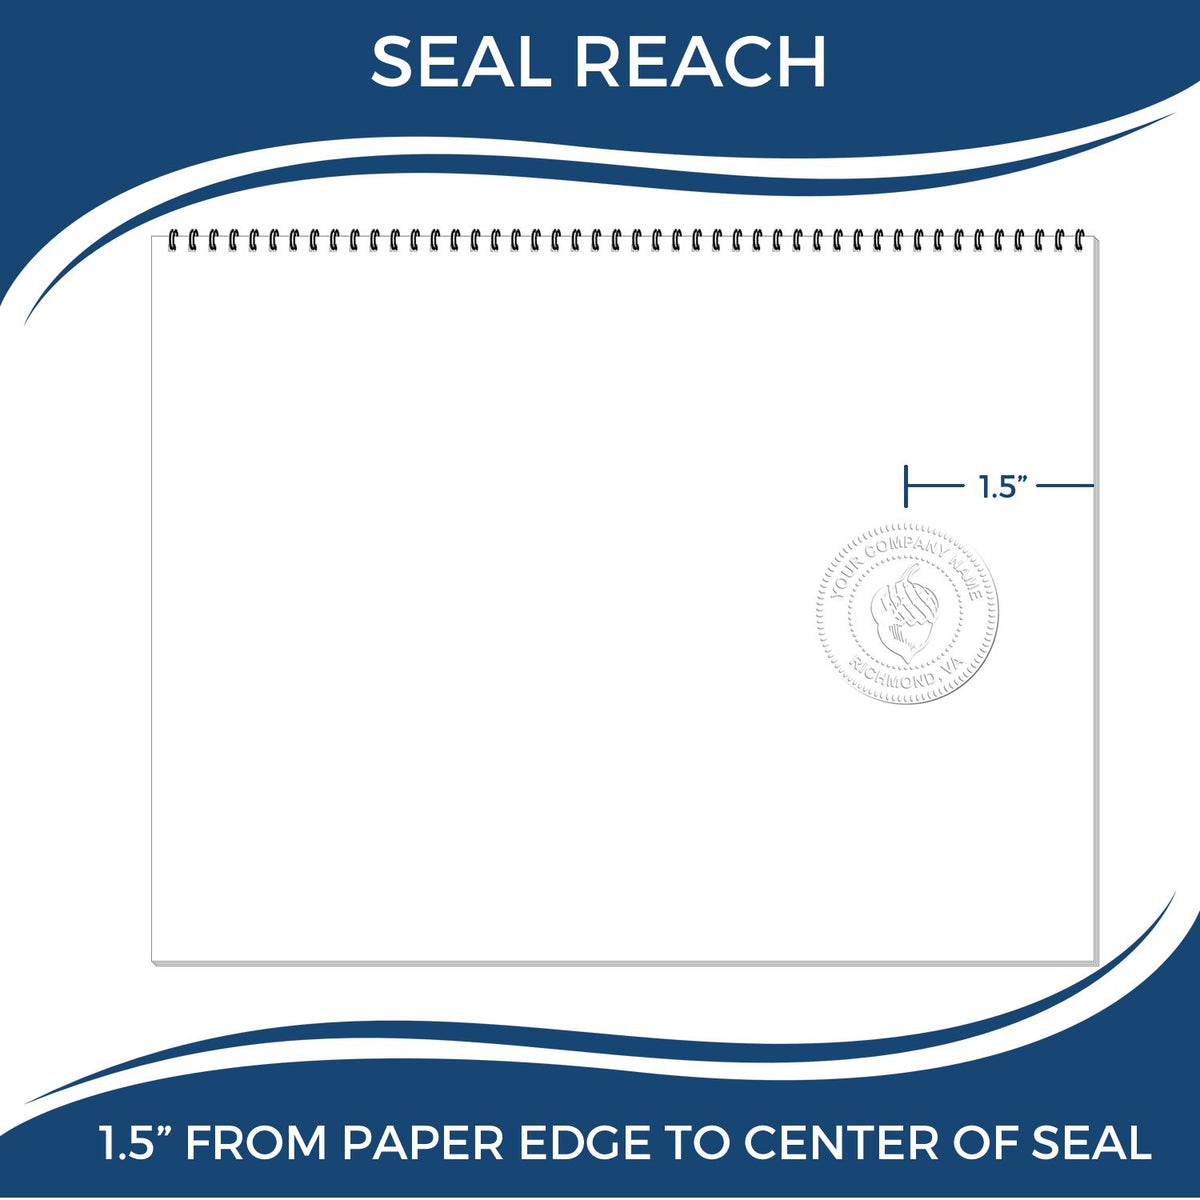 An infographic showing the seal reach which is represented by a ruler and a miniature seal image of the State of New York Architectural Seal Embosser